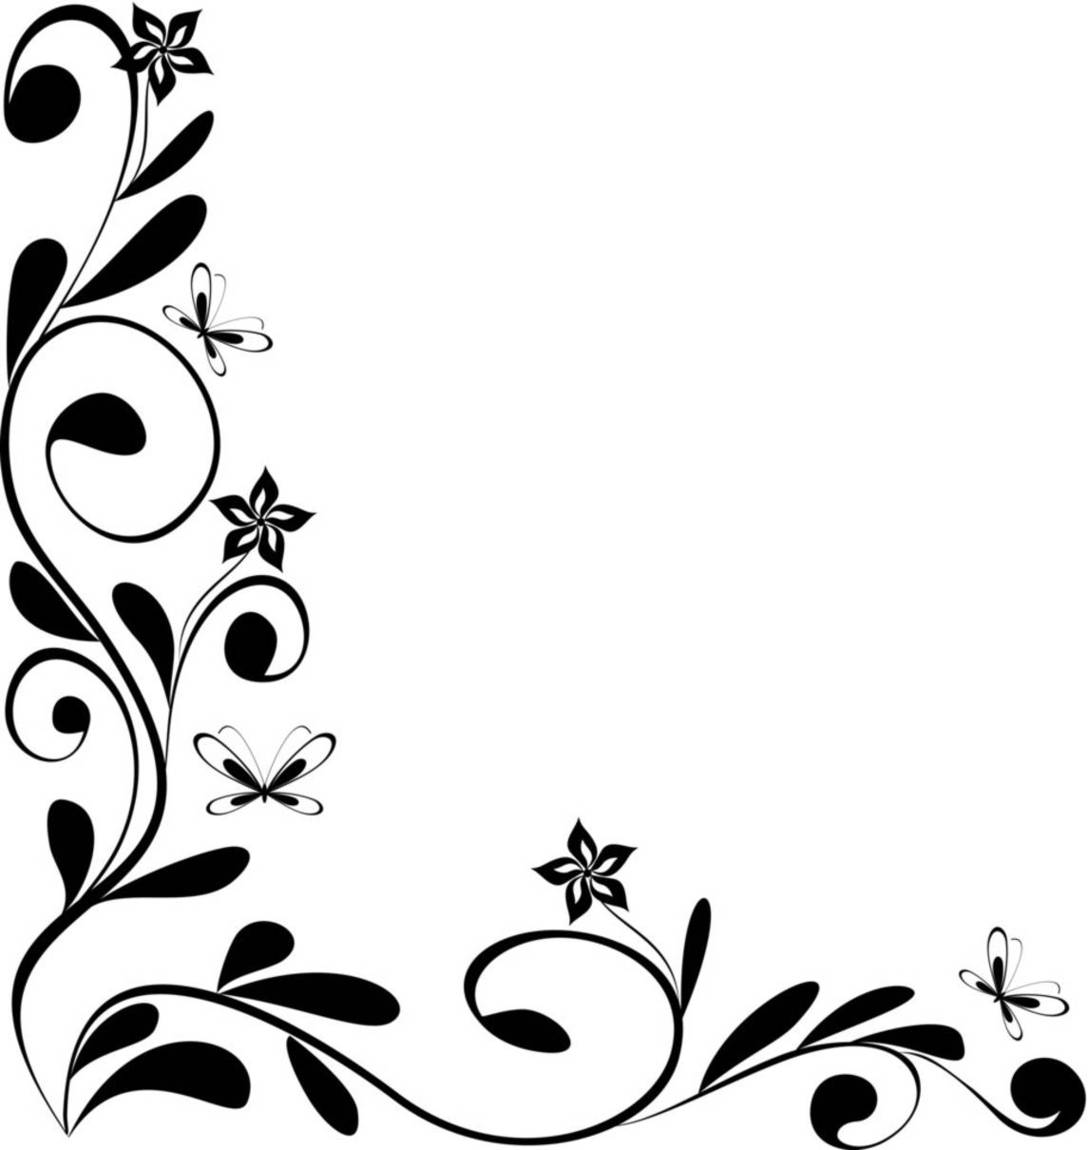 Cool Border Designs Clipart - Free to use Clip Art Resource